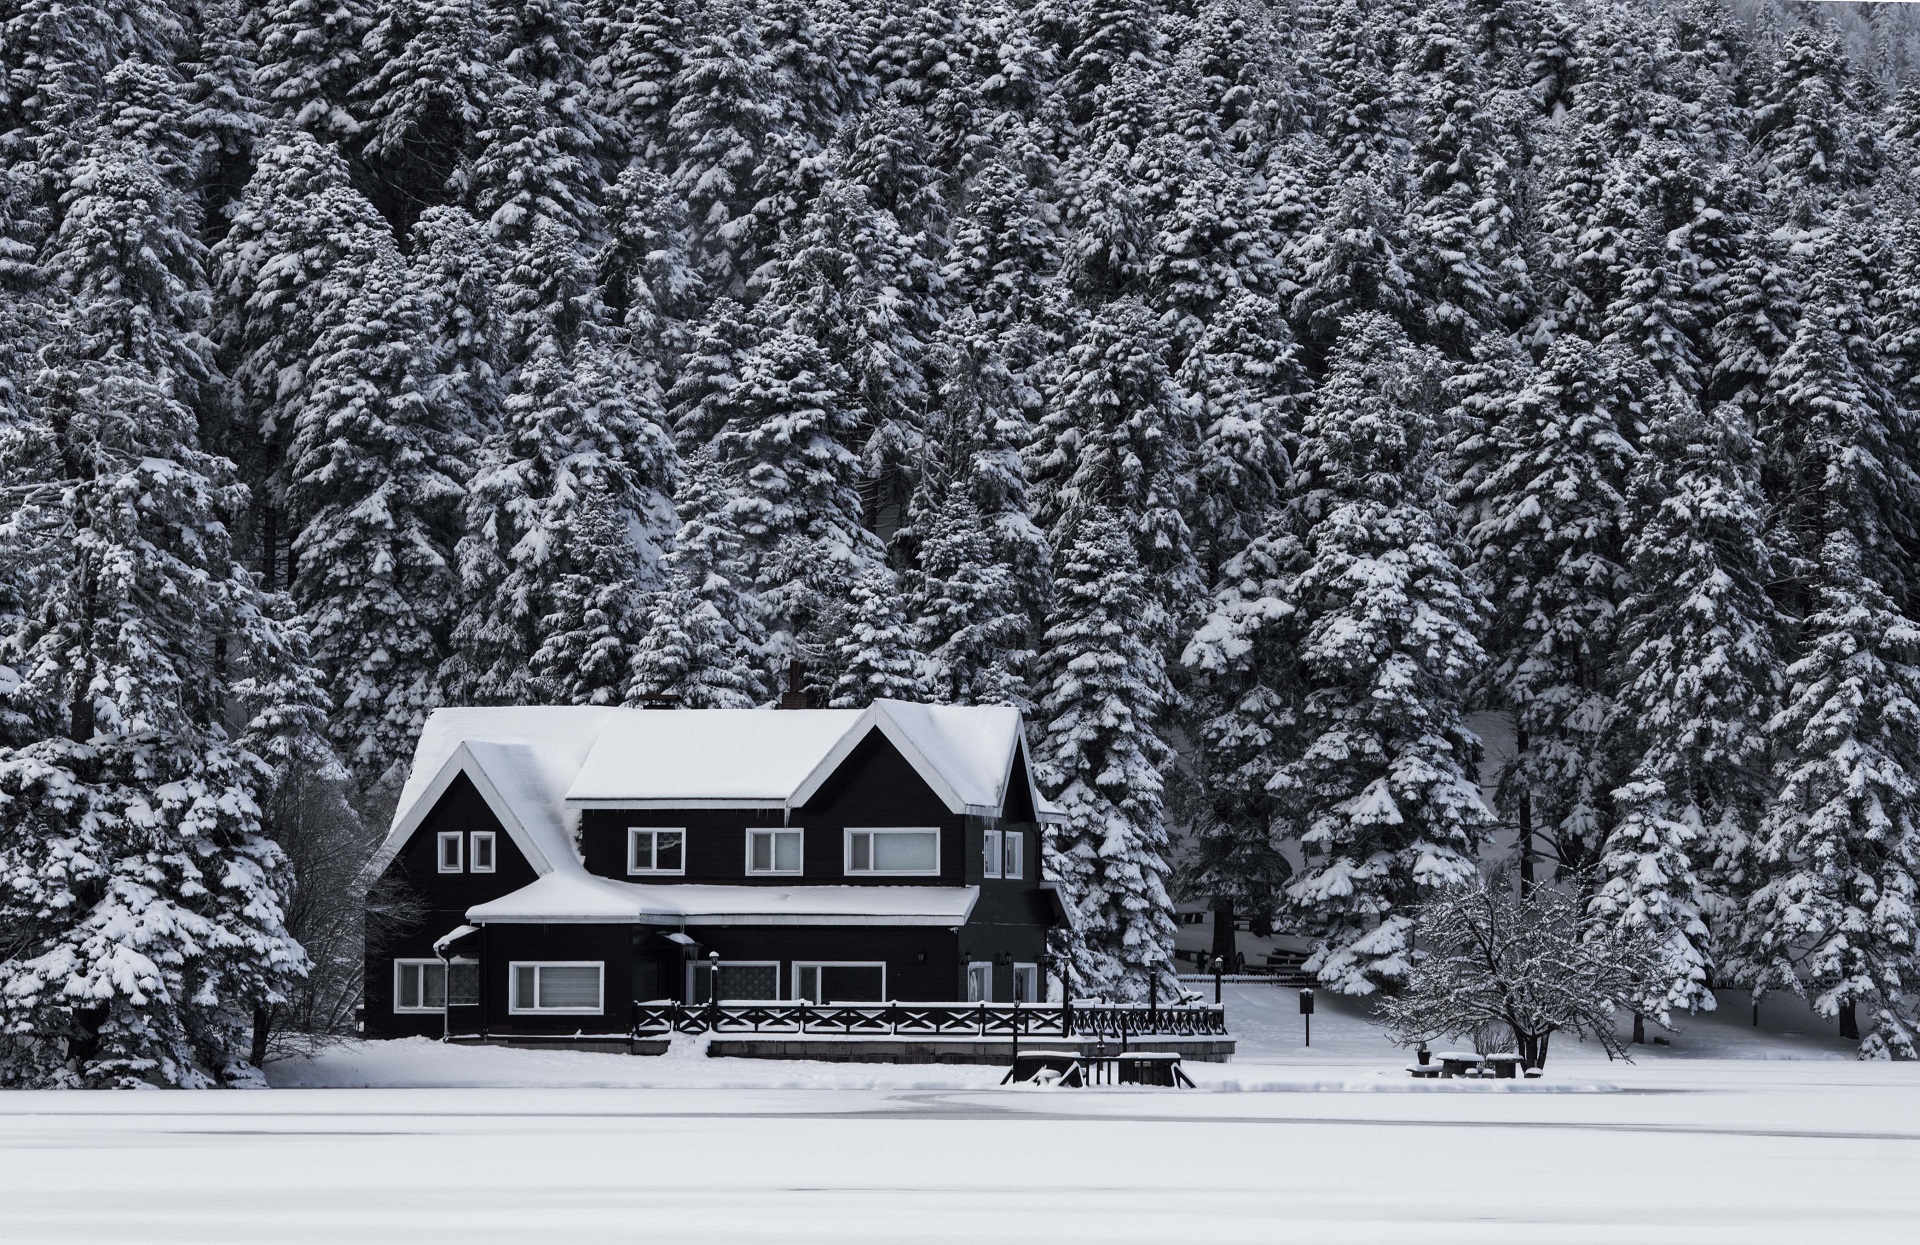 Challenges of Winter Weather, Strengthening Your Home's Defenses